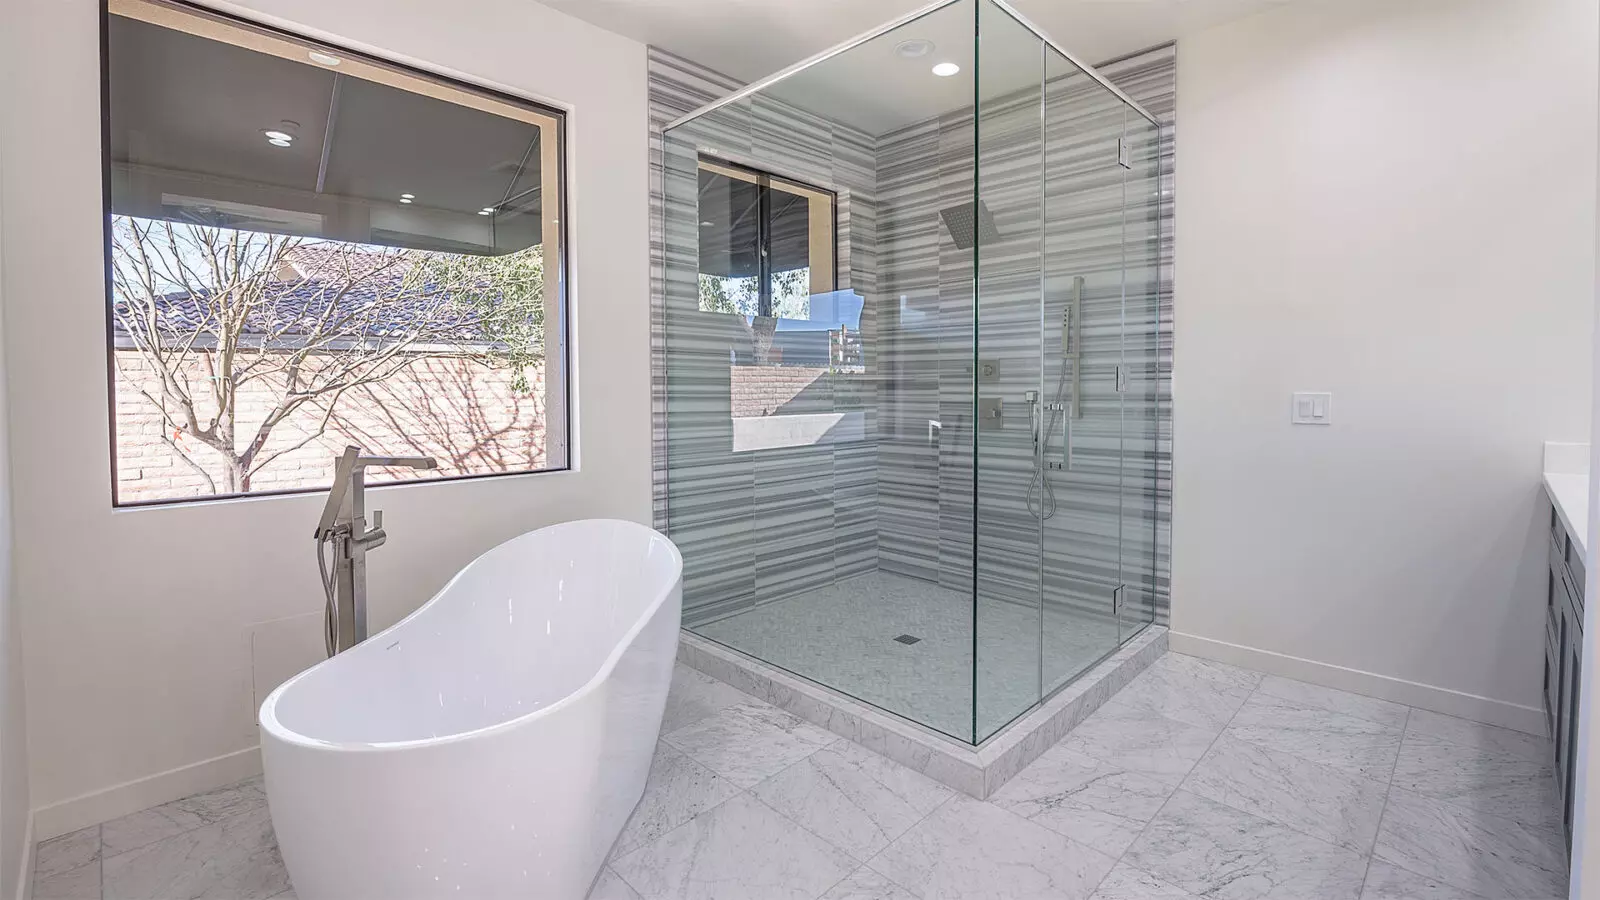 A Phoenix Contemporary designed bathroom with a shower and tub